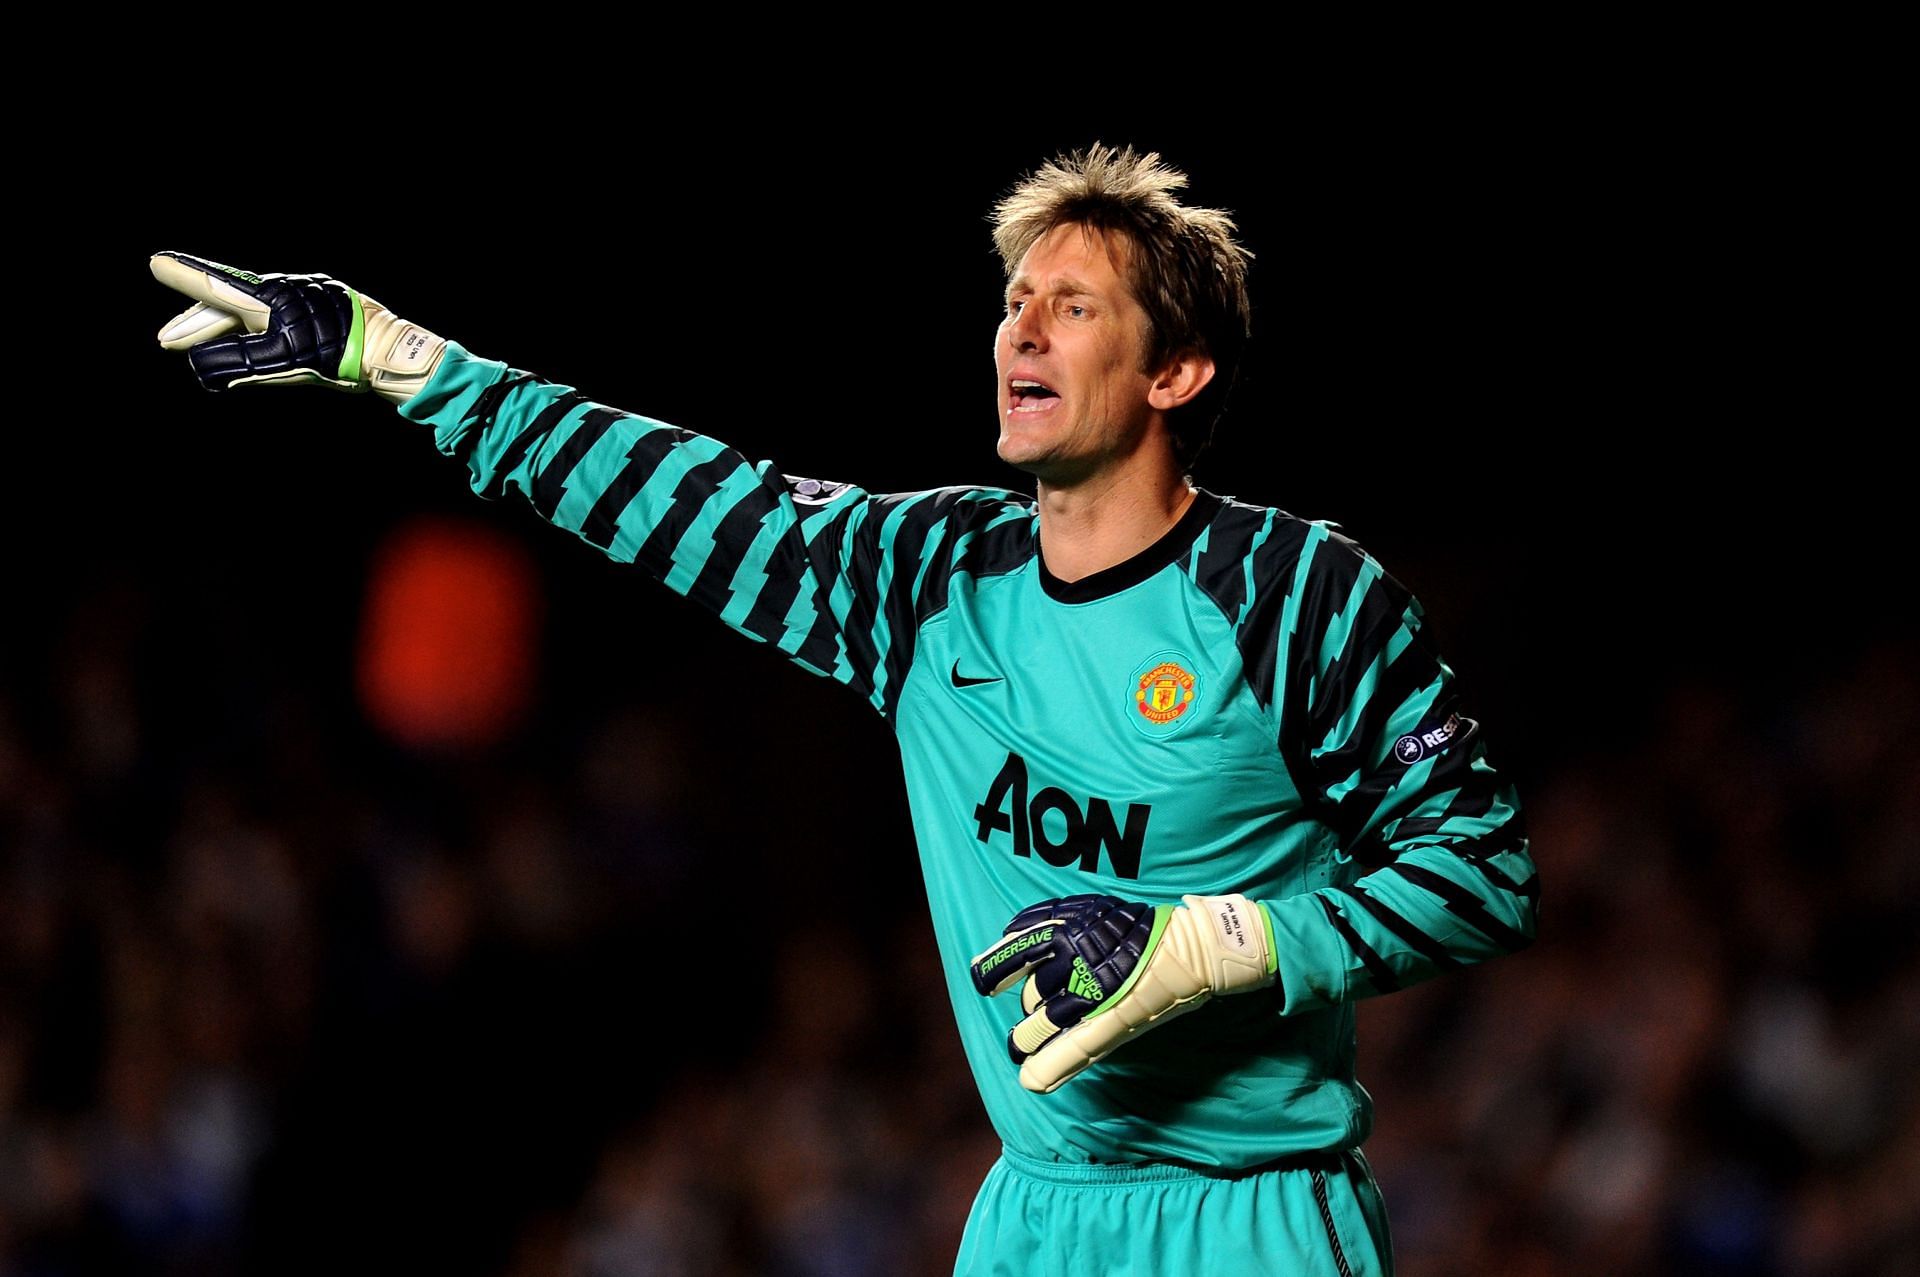 Edwin van der Sar is one of the greatest goalkeepers in Premier League history